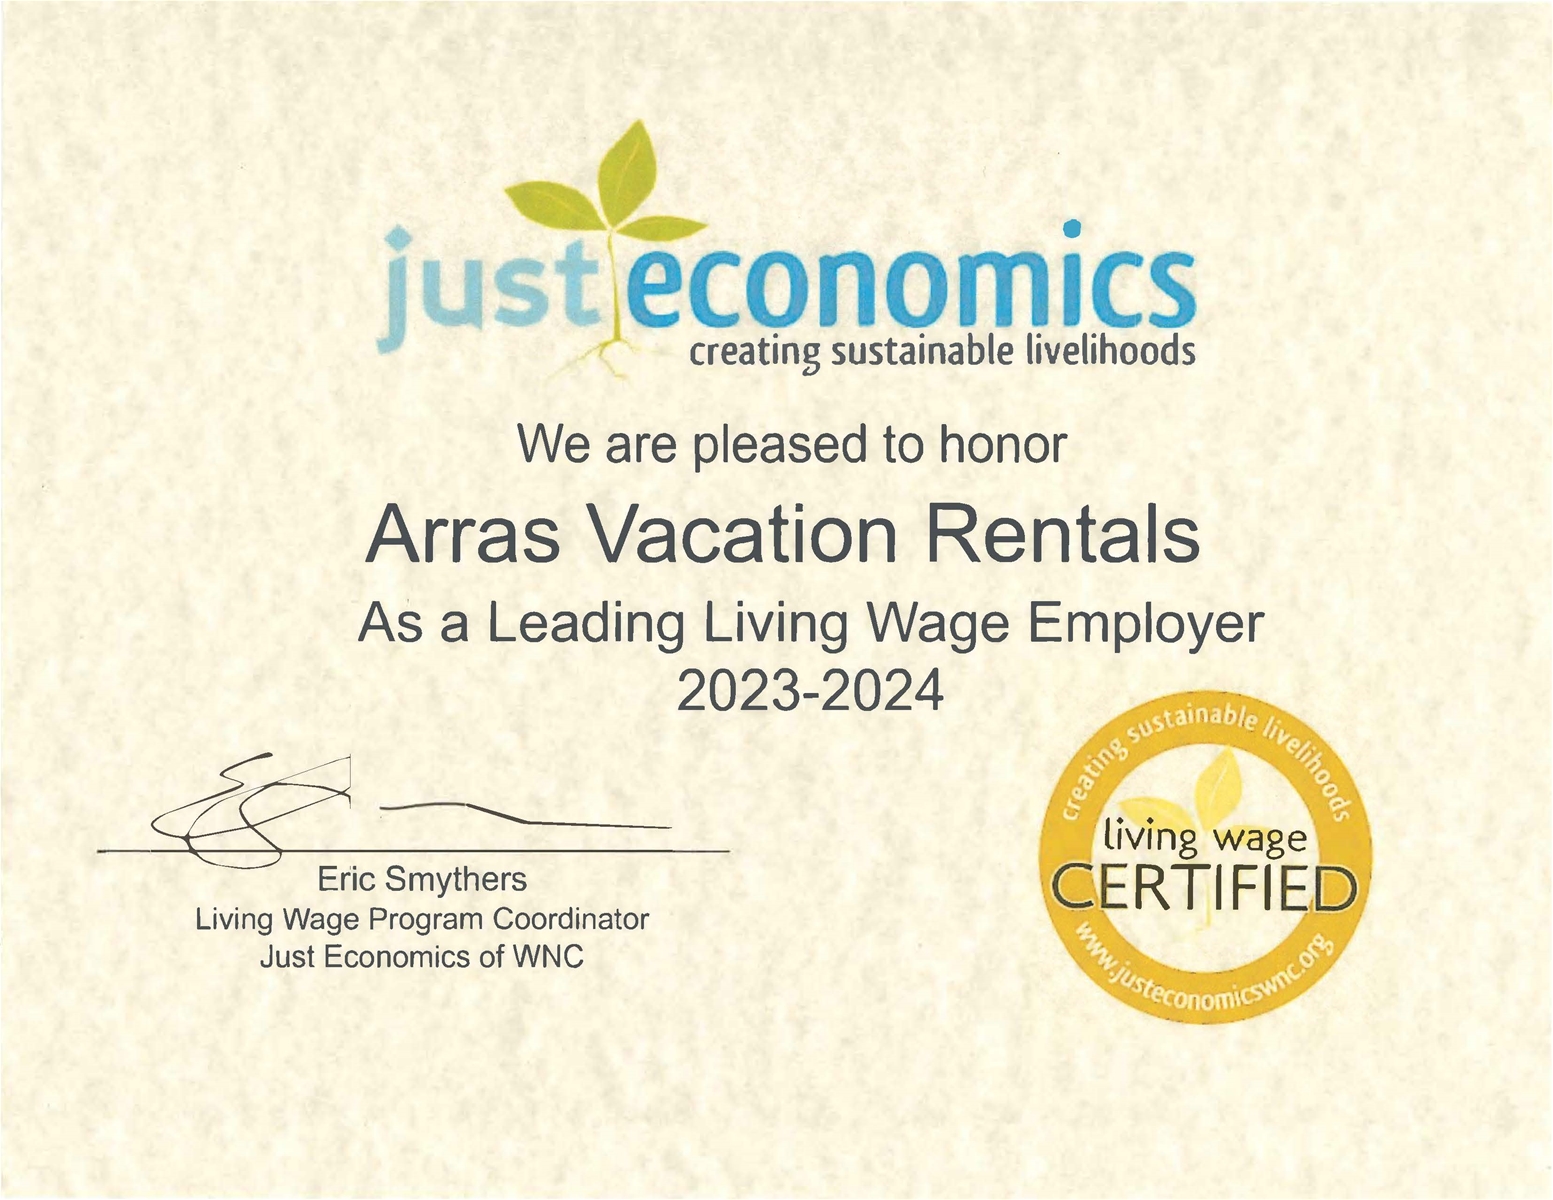 Just Economics Living Wage Certified